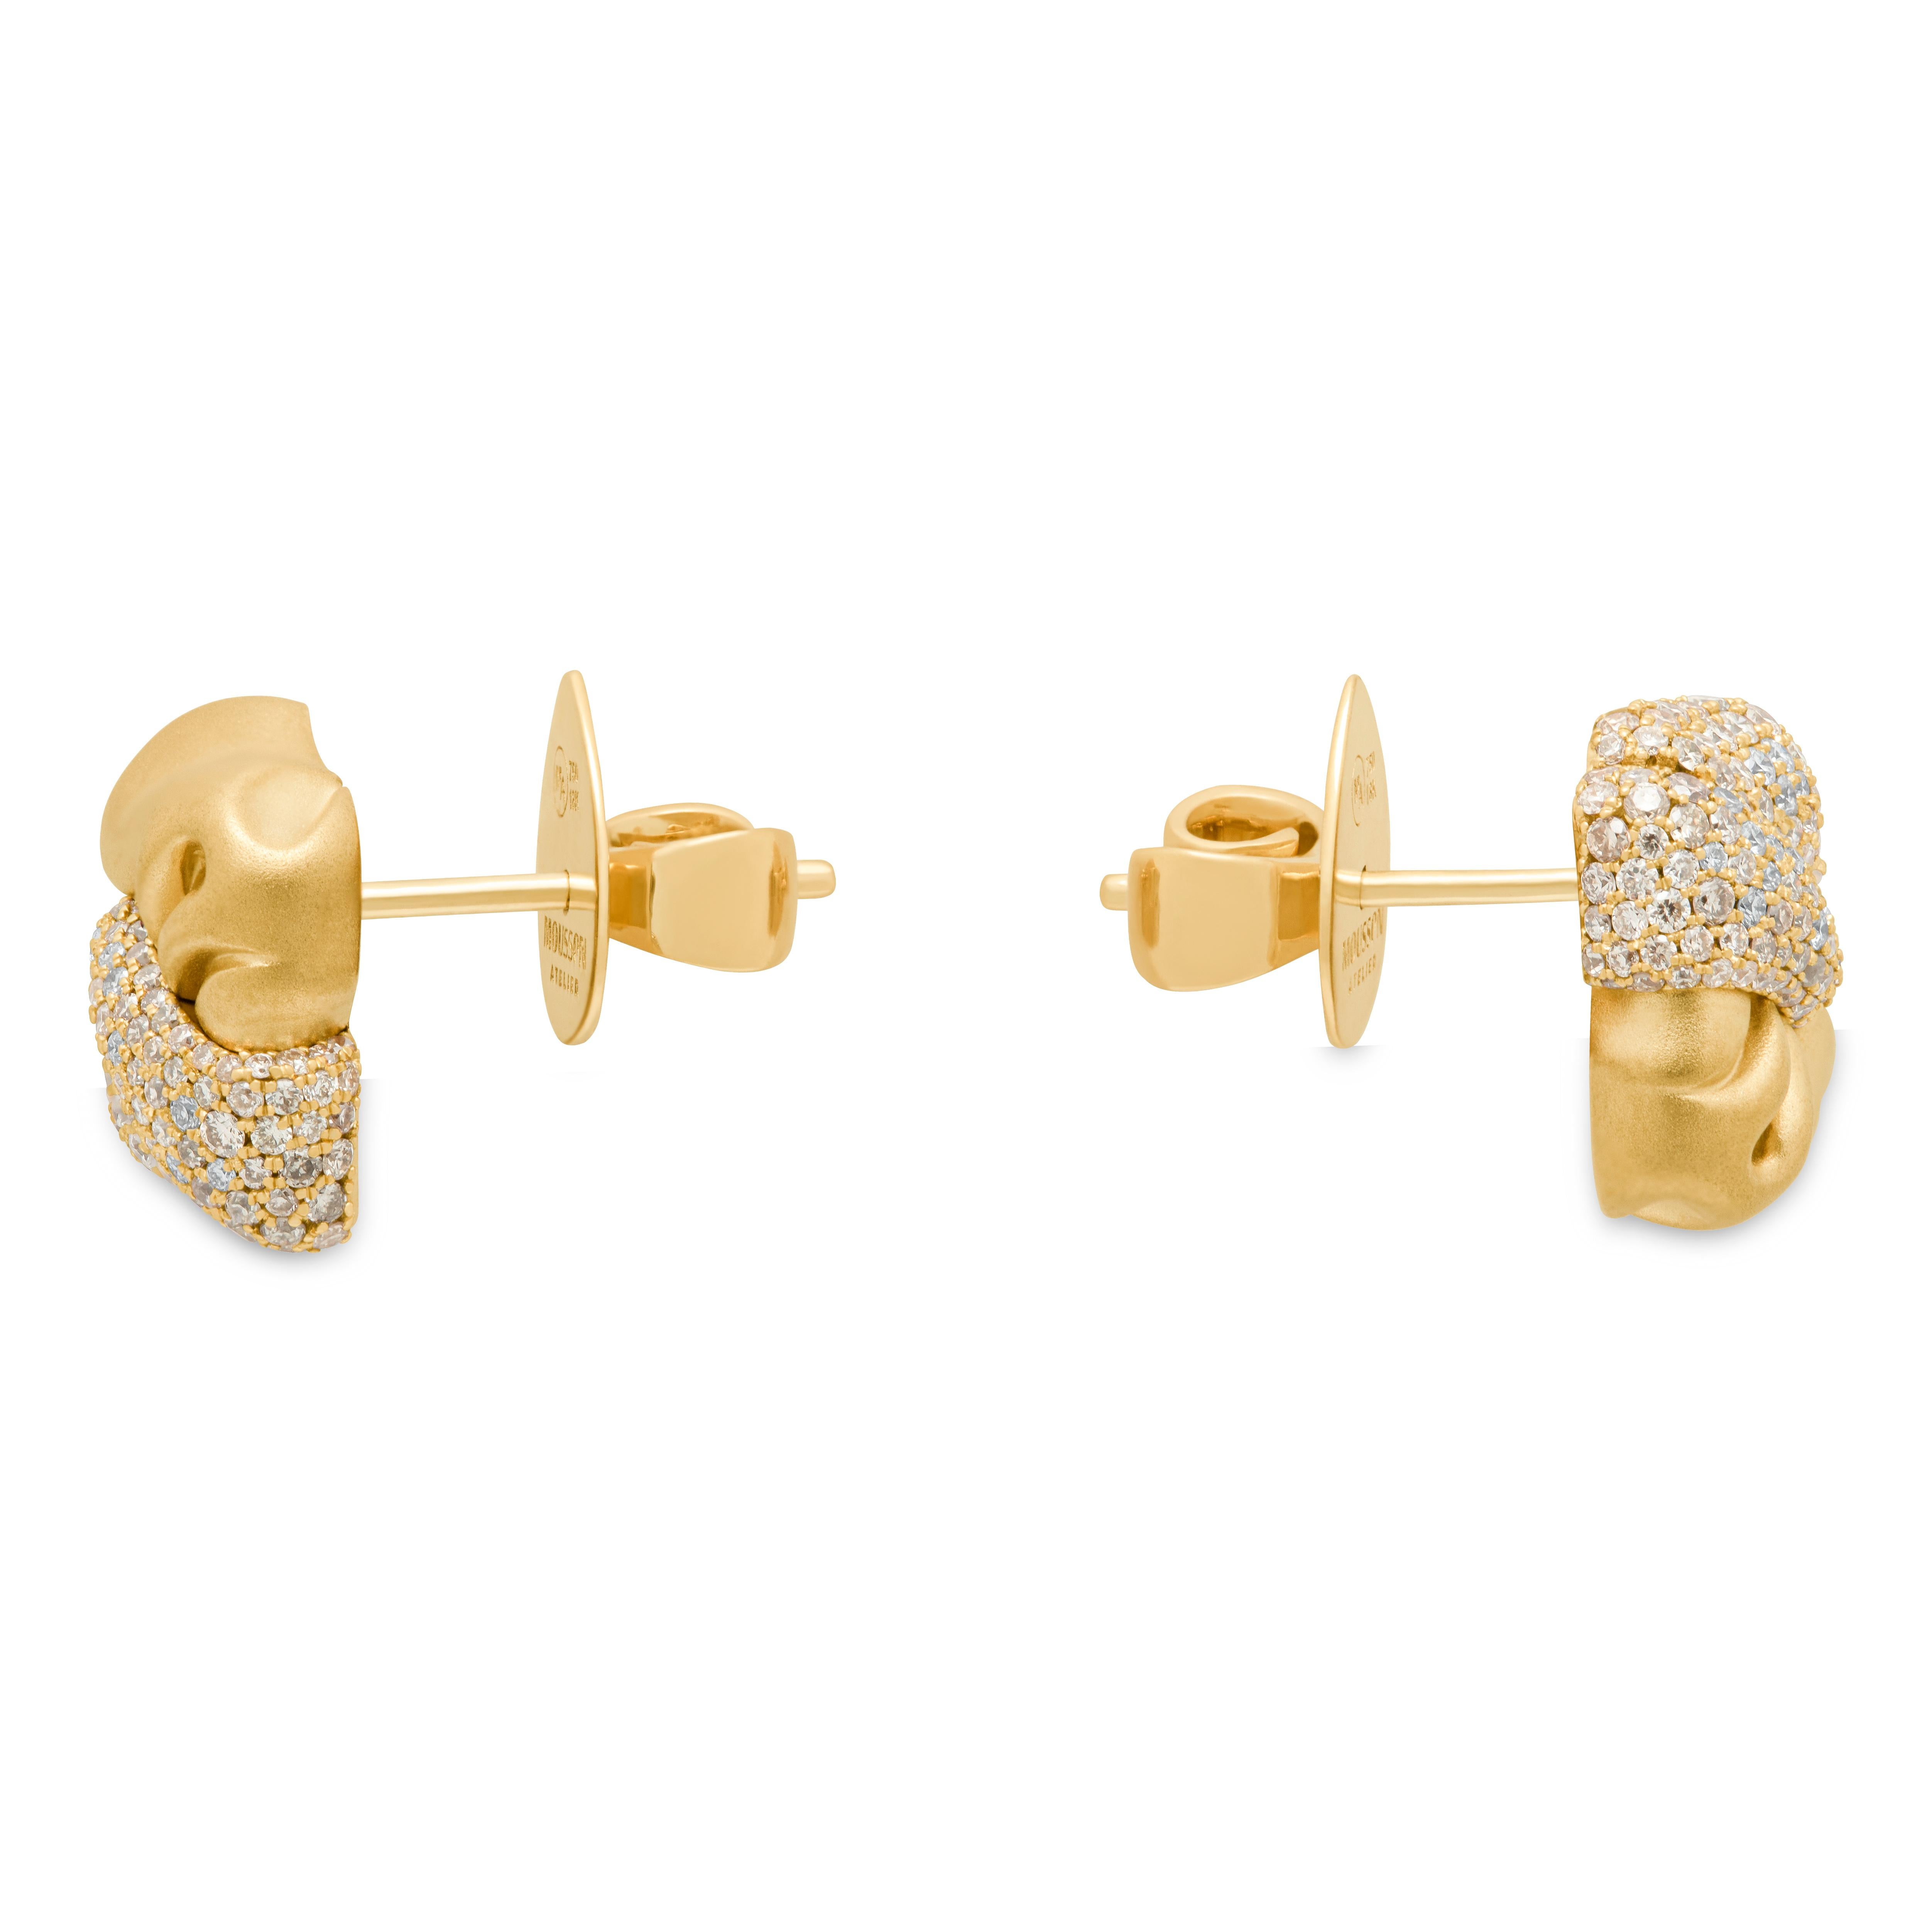 Diamonds, Champagne Diamonds 18 Karat Yellow Gold Stud Earrings

Crafted with a sense of energy and movement, our Silk Earrings capture the essence of crumpled fabric. Half of the Studs are formed from 18K Matte Yellow Gold, while the other is